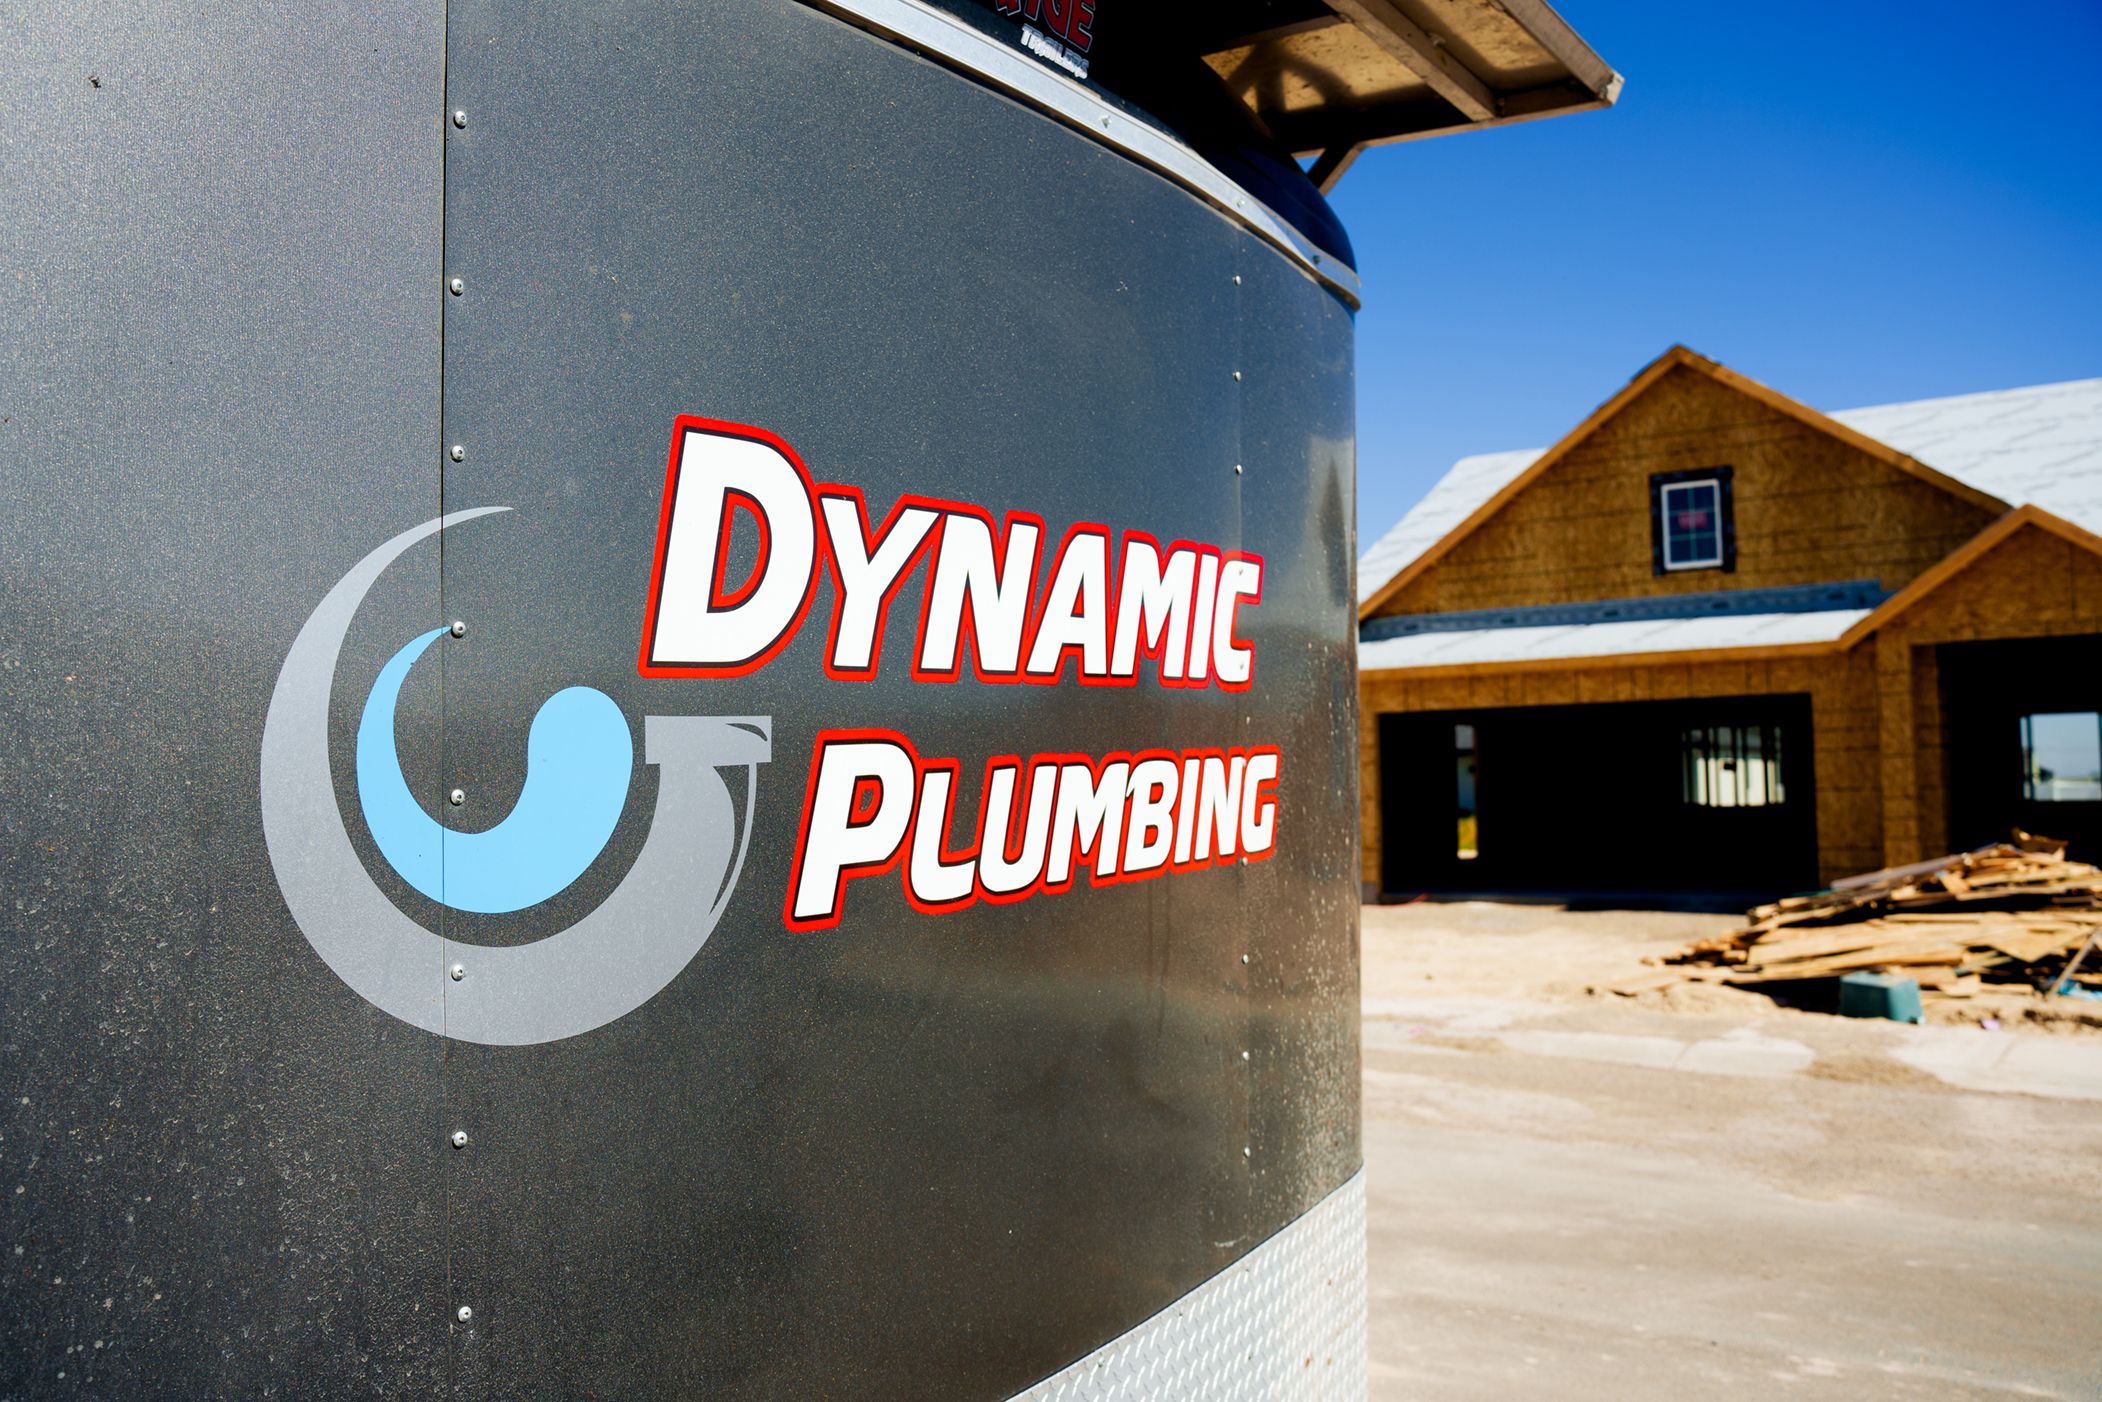 Dynamic Plumbing Trailer outside of a house being built